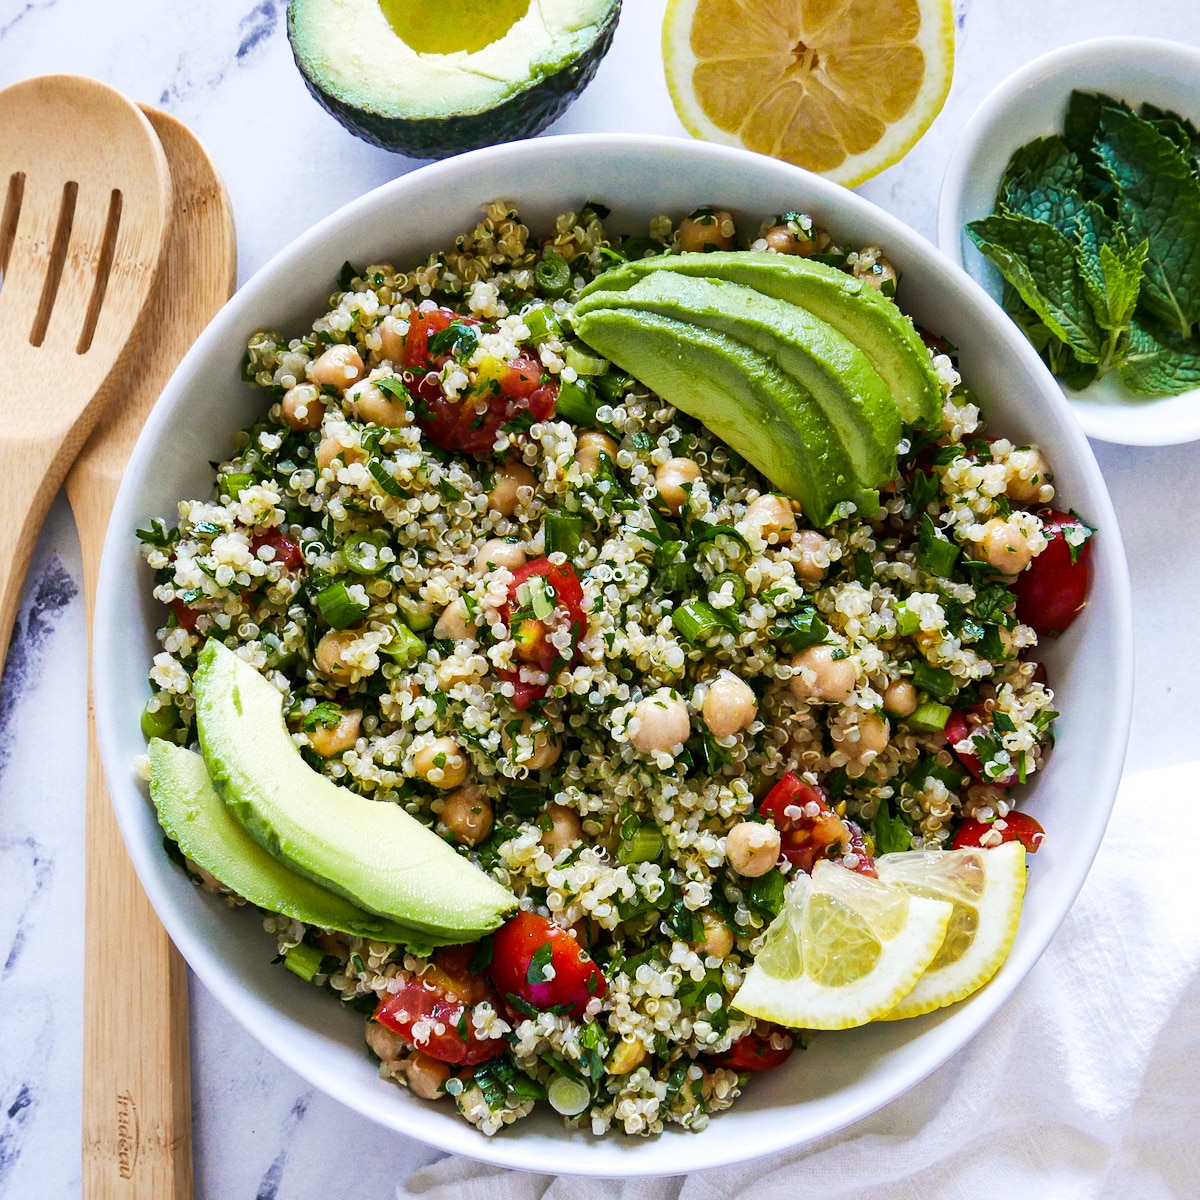 Quinoa tabbouleh garnished with avocado, lemon, and chopped mint.